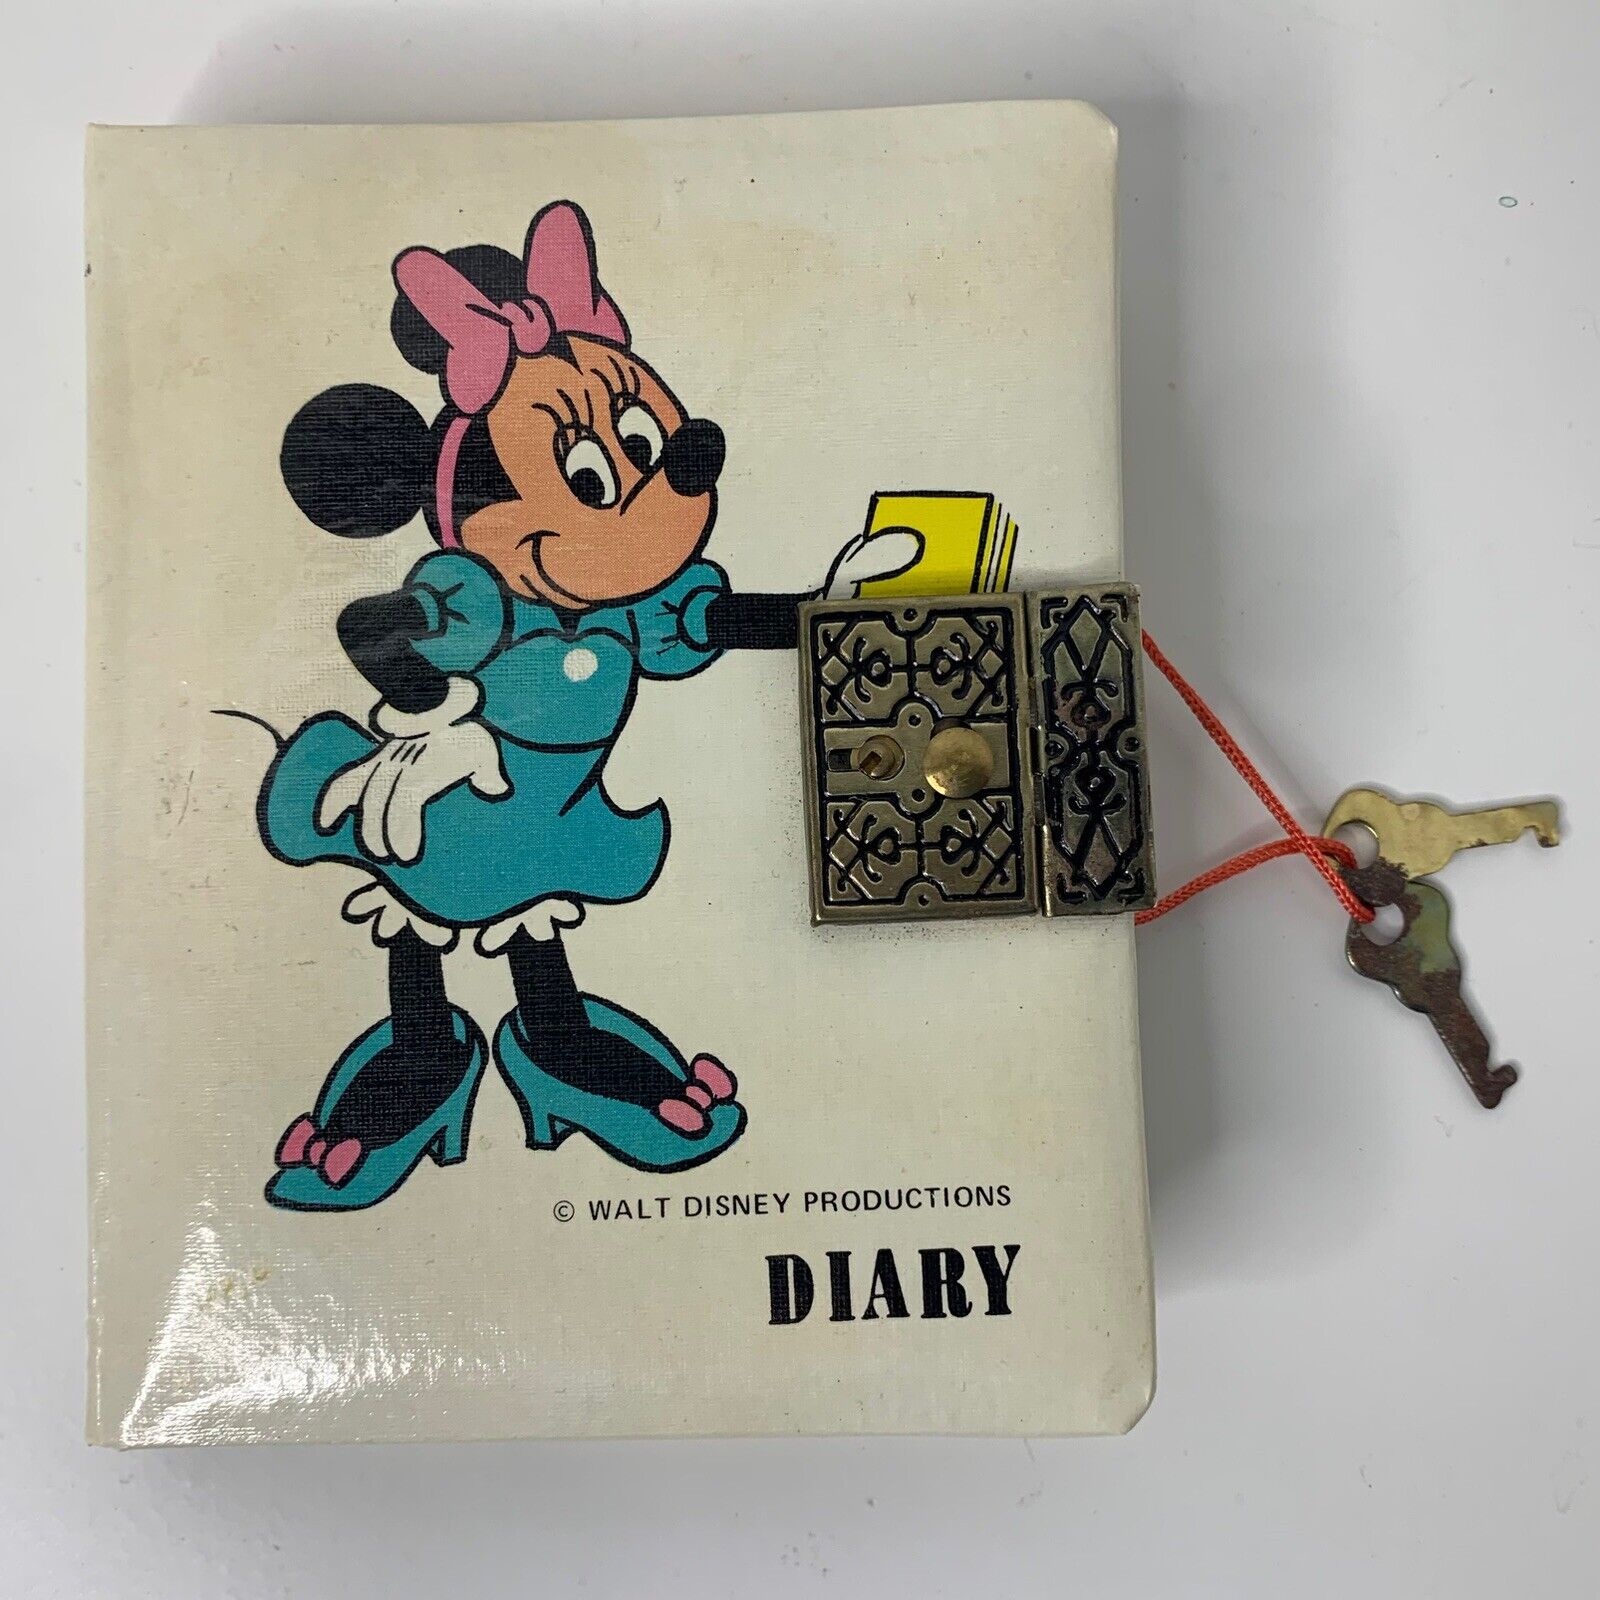 VTG Walt Disney Productions Minnie Mouse Journal Diary Cover New